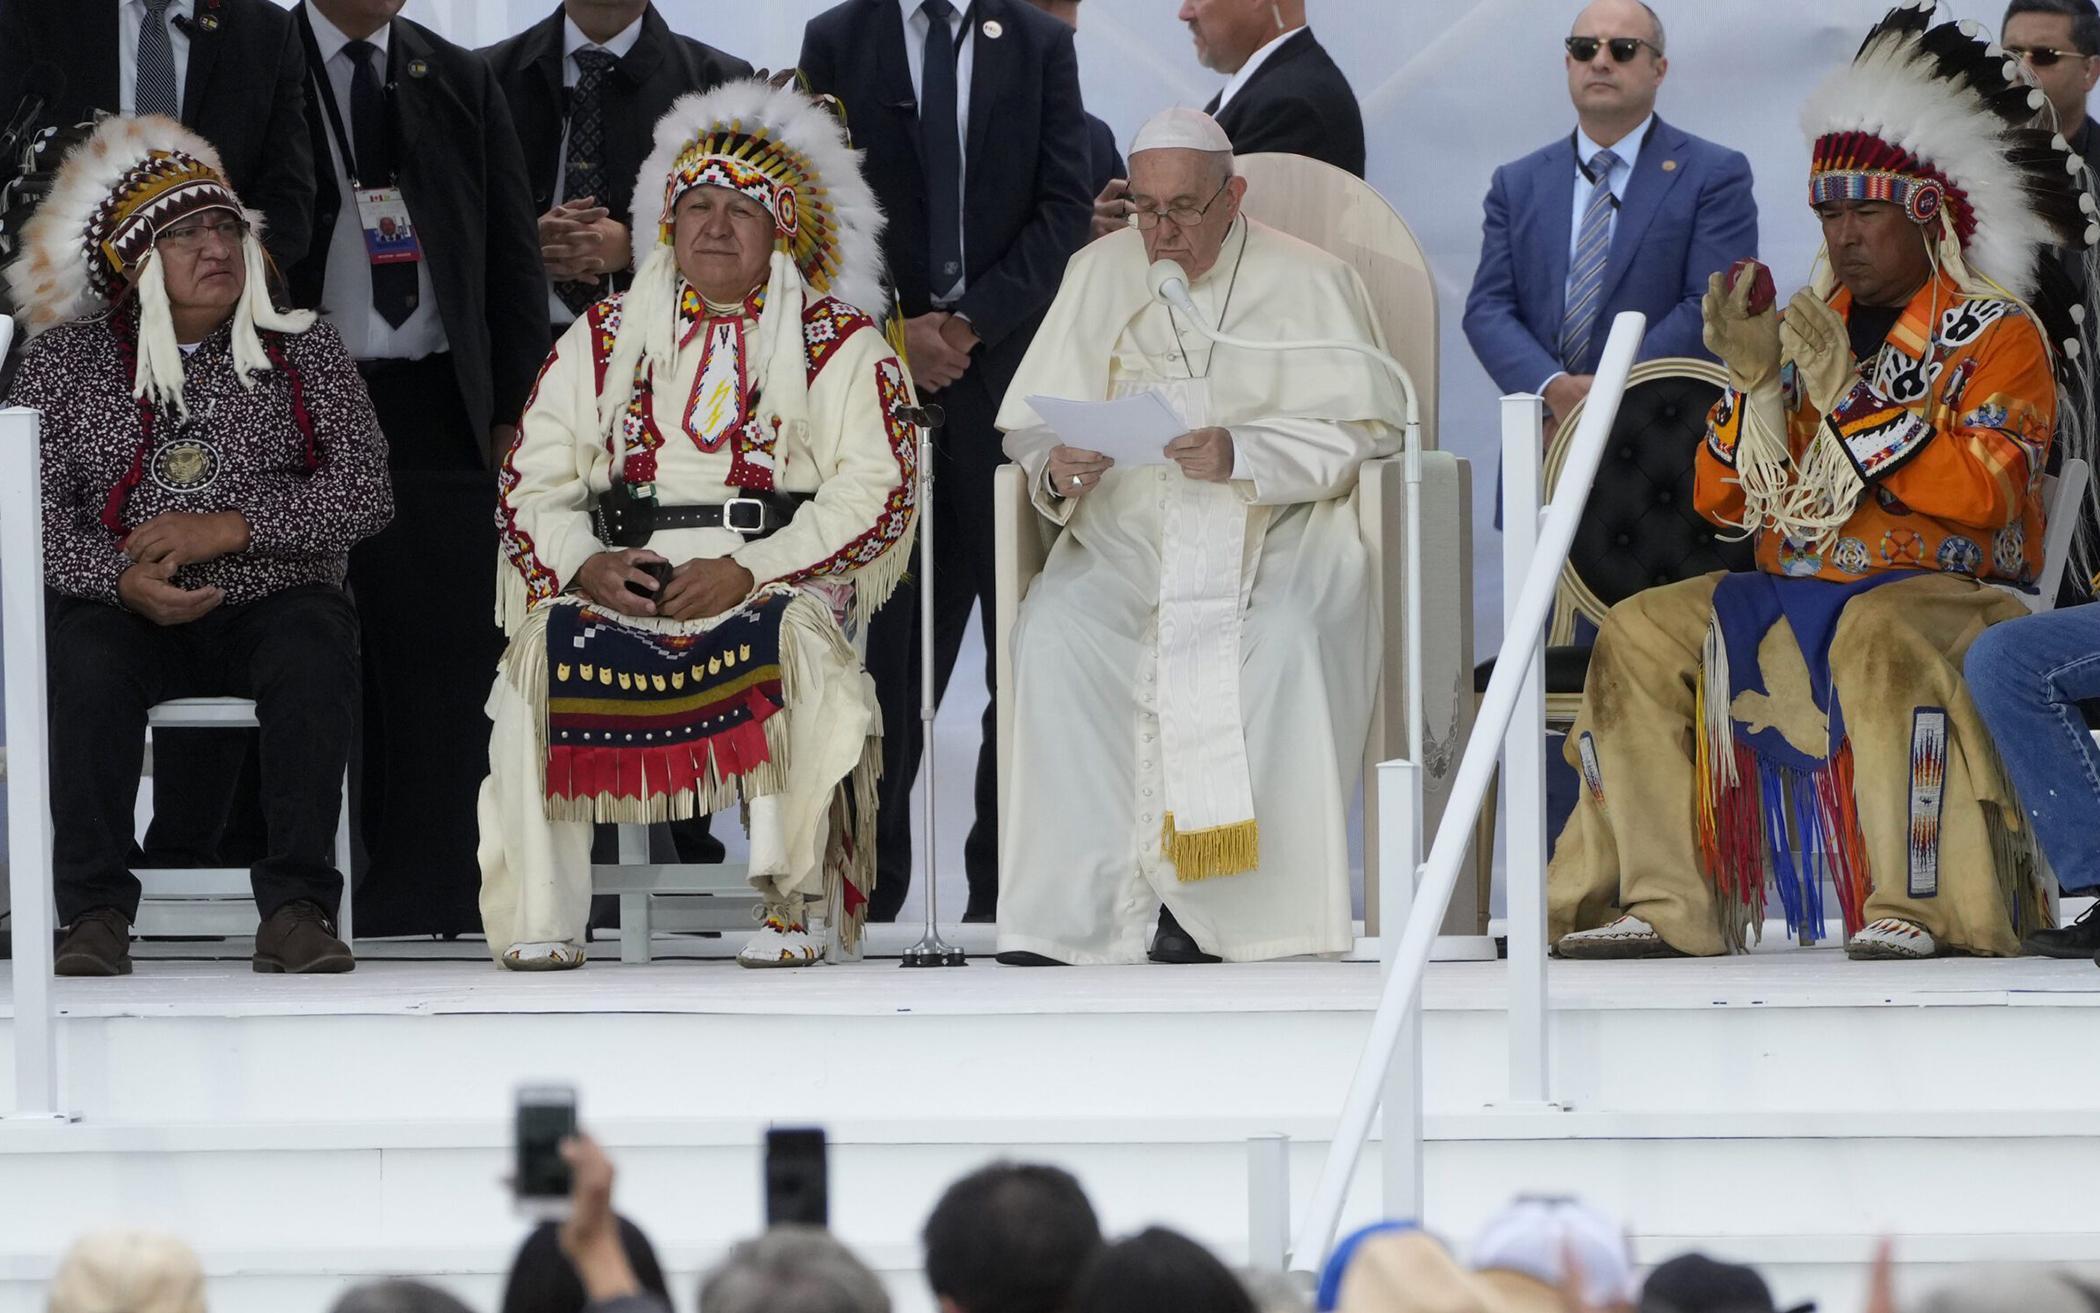 In Canada, Pope Francis Apologizes to Indigenous Peoples, Calls It ‘First Step’